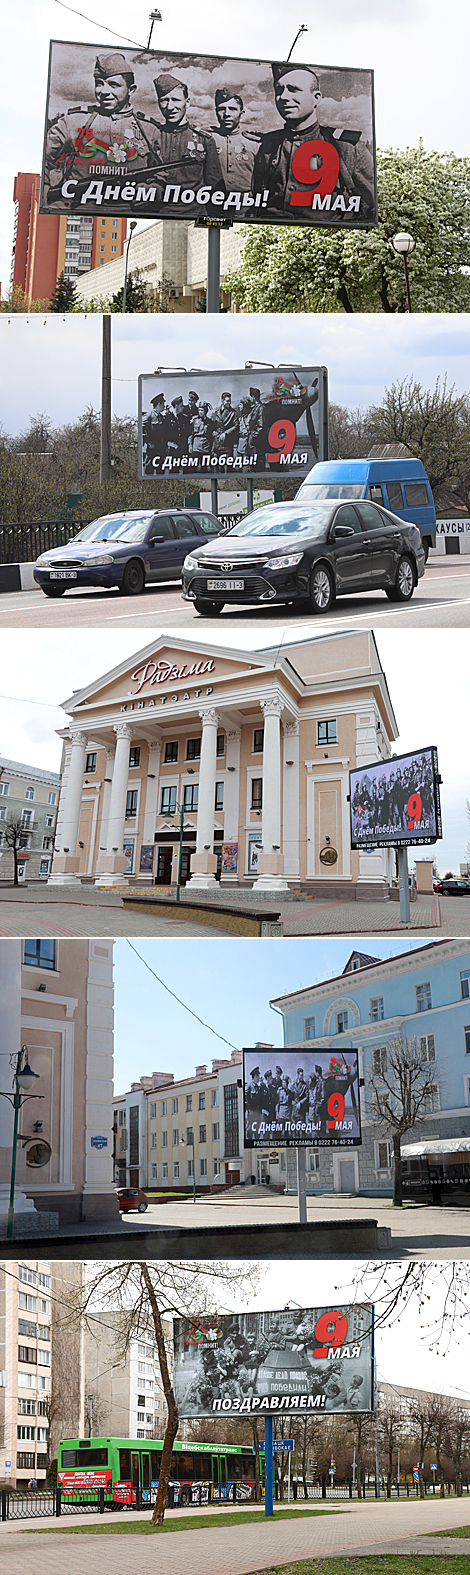 Belarus Remembers posters dedicated to the 75th anniversary of the Great Victory in the streets of Belarusian cities